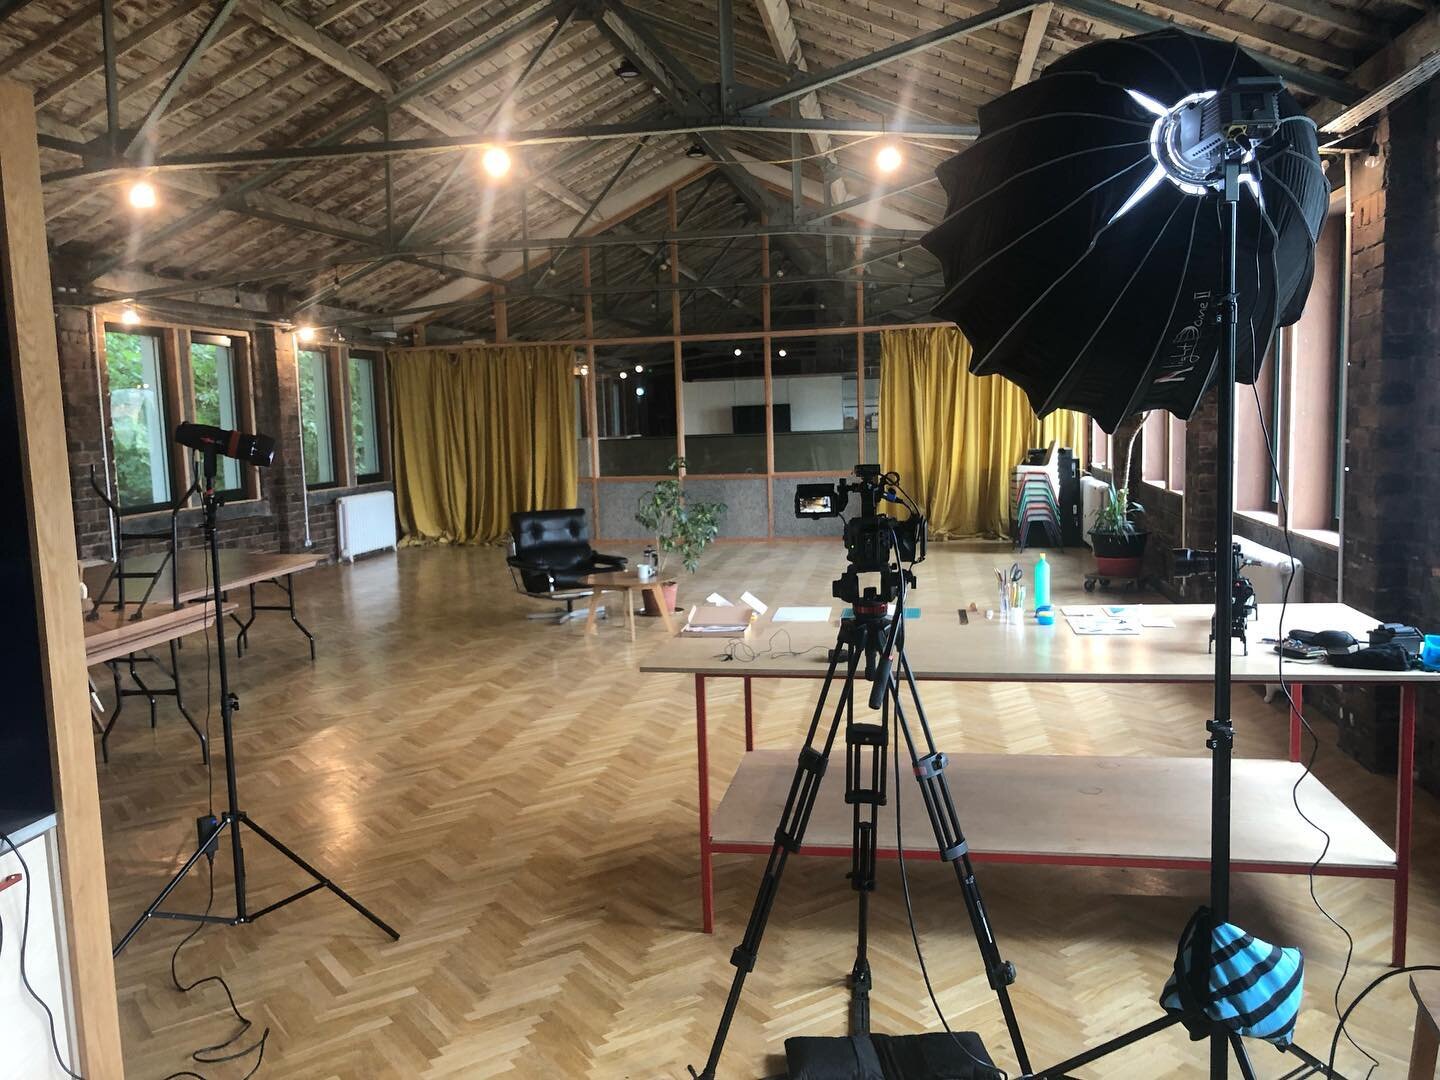 It&rsquo;s been a busy few weeks with lots of fun shoots in various locations. Here&rsquo;s a bunch of #bts from a few of them.
.
#mambovideoproduction #mambovideo #videoproduction #setlife #glasgow